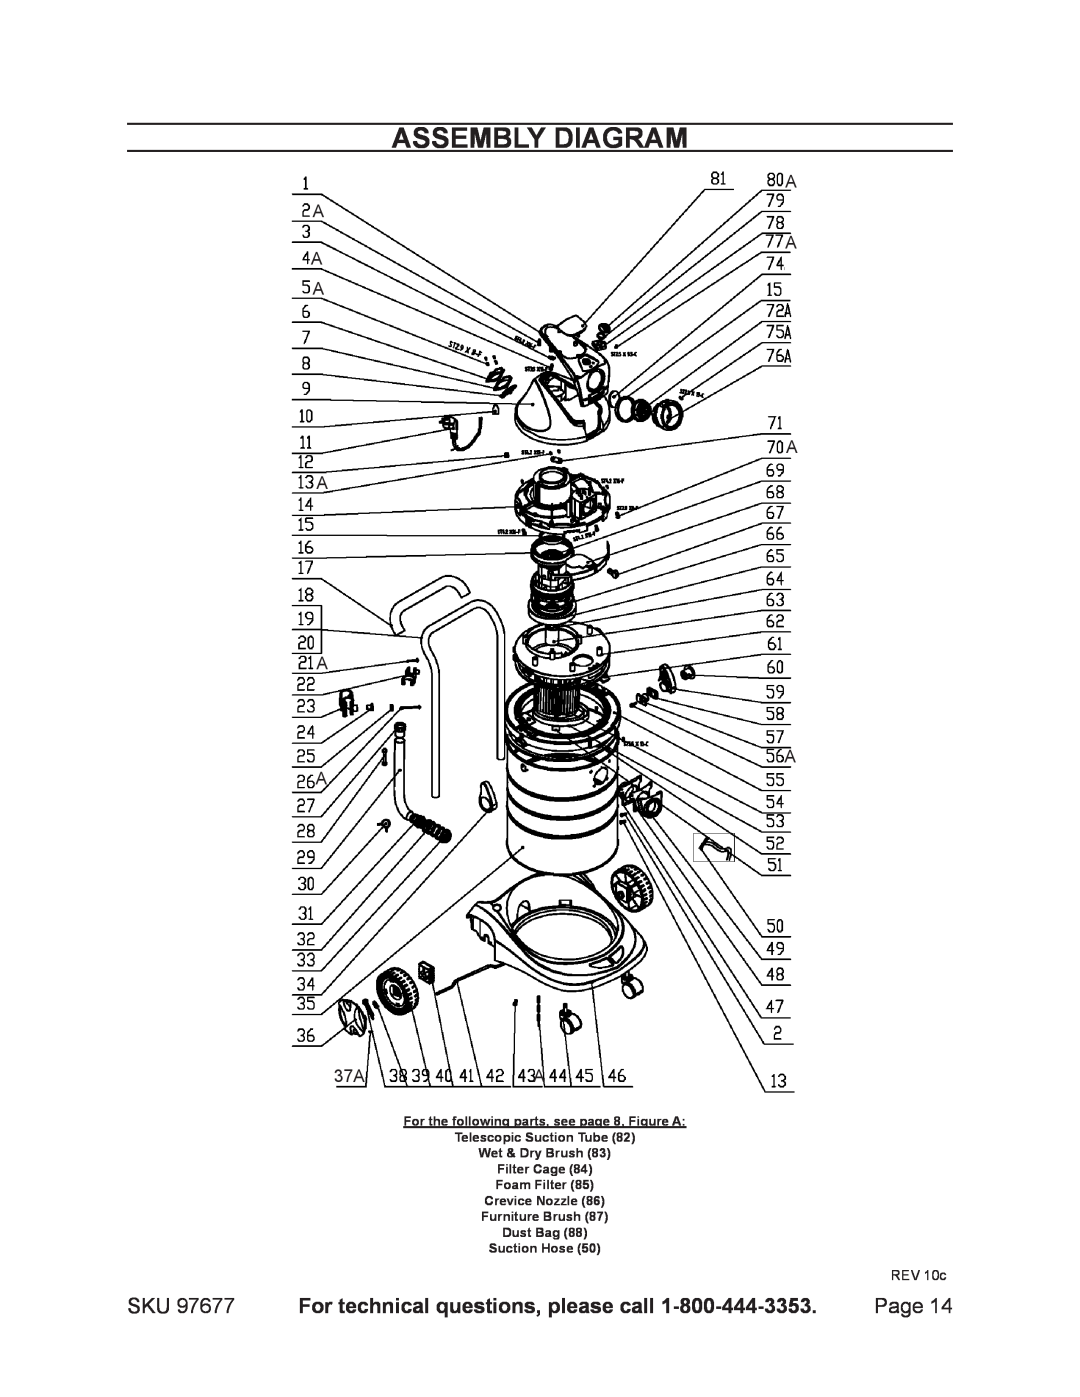 Chicago Electric 97677 manual Assembly Diagram, For the following parts, see page 8, Figure A Telescopic Suction Tube 